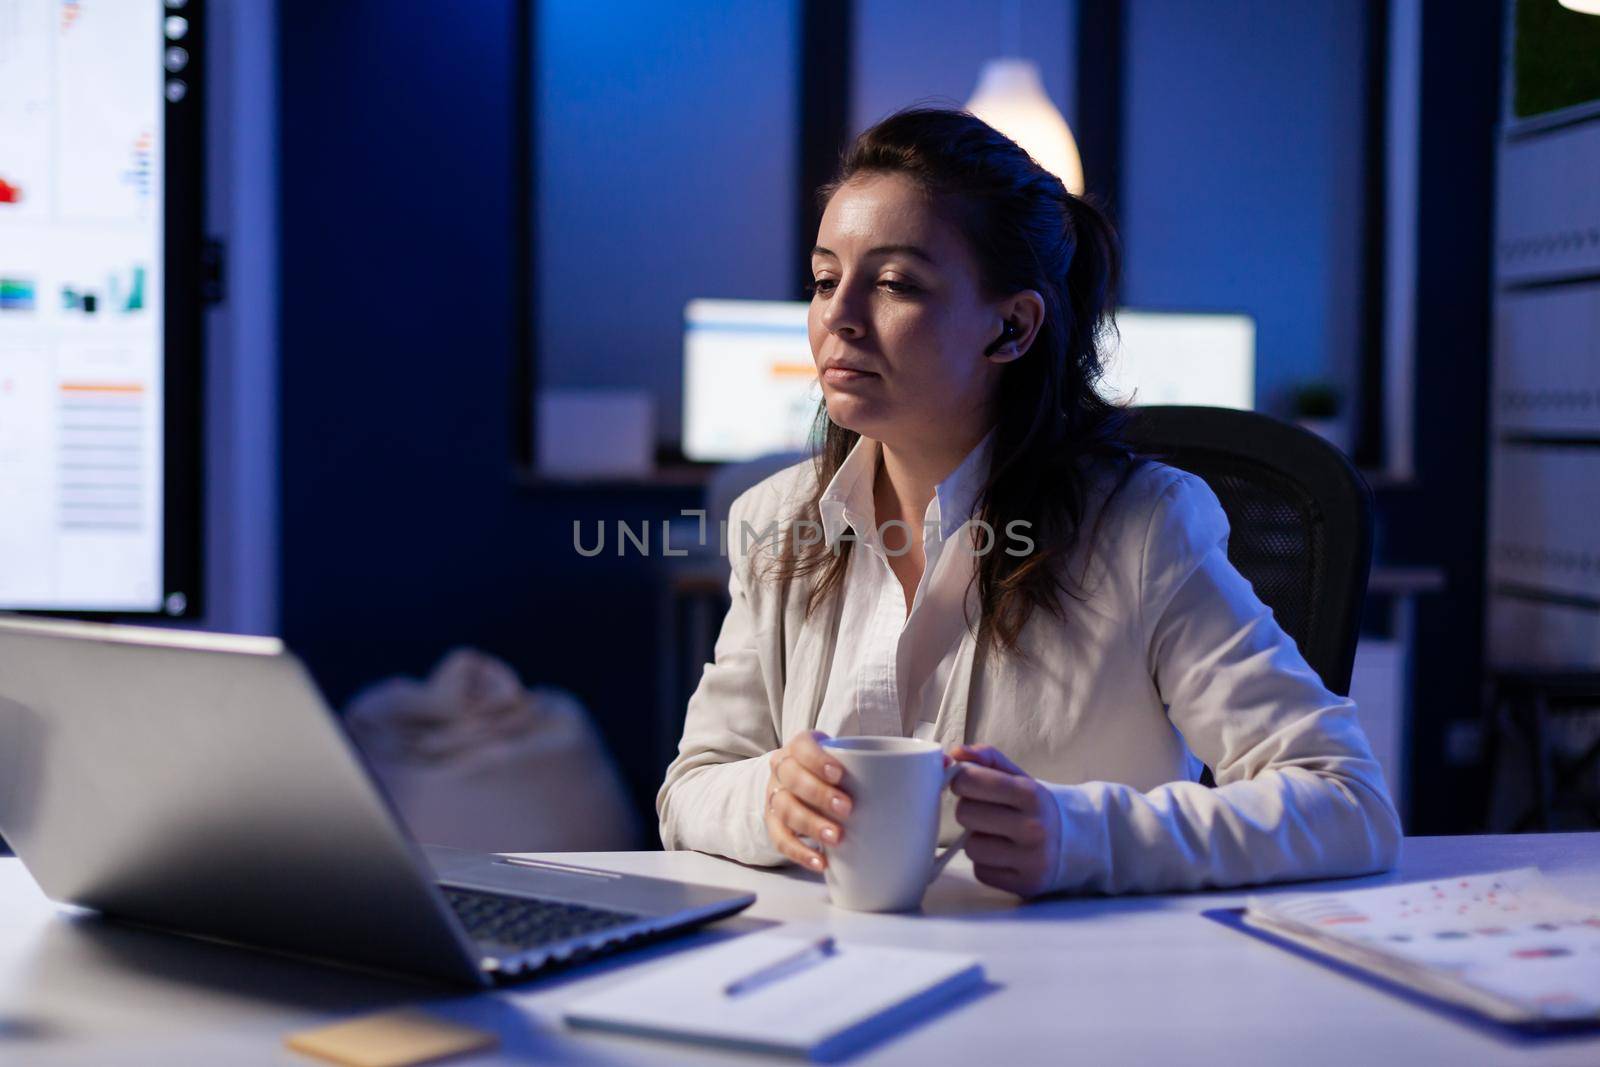 Workaholic businesswoman analysing economic statistics late at night in business office. Tired woman planning marketing project before deadline using modern technology network wireless